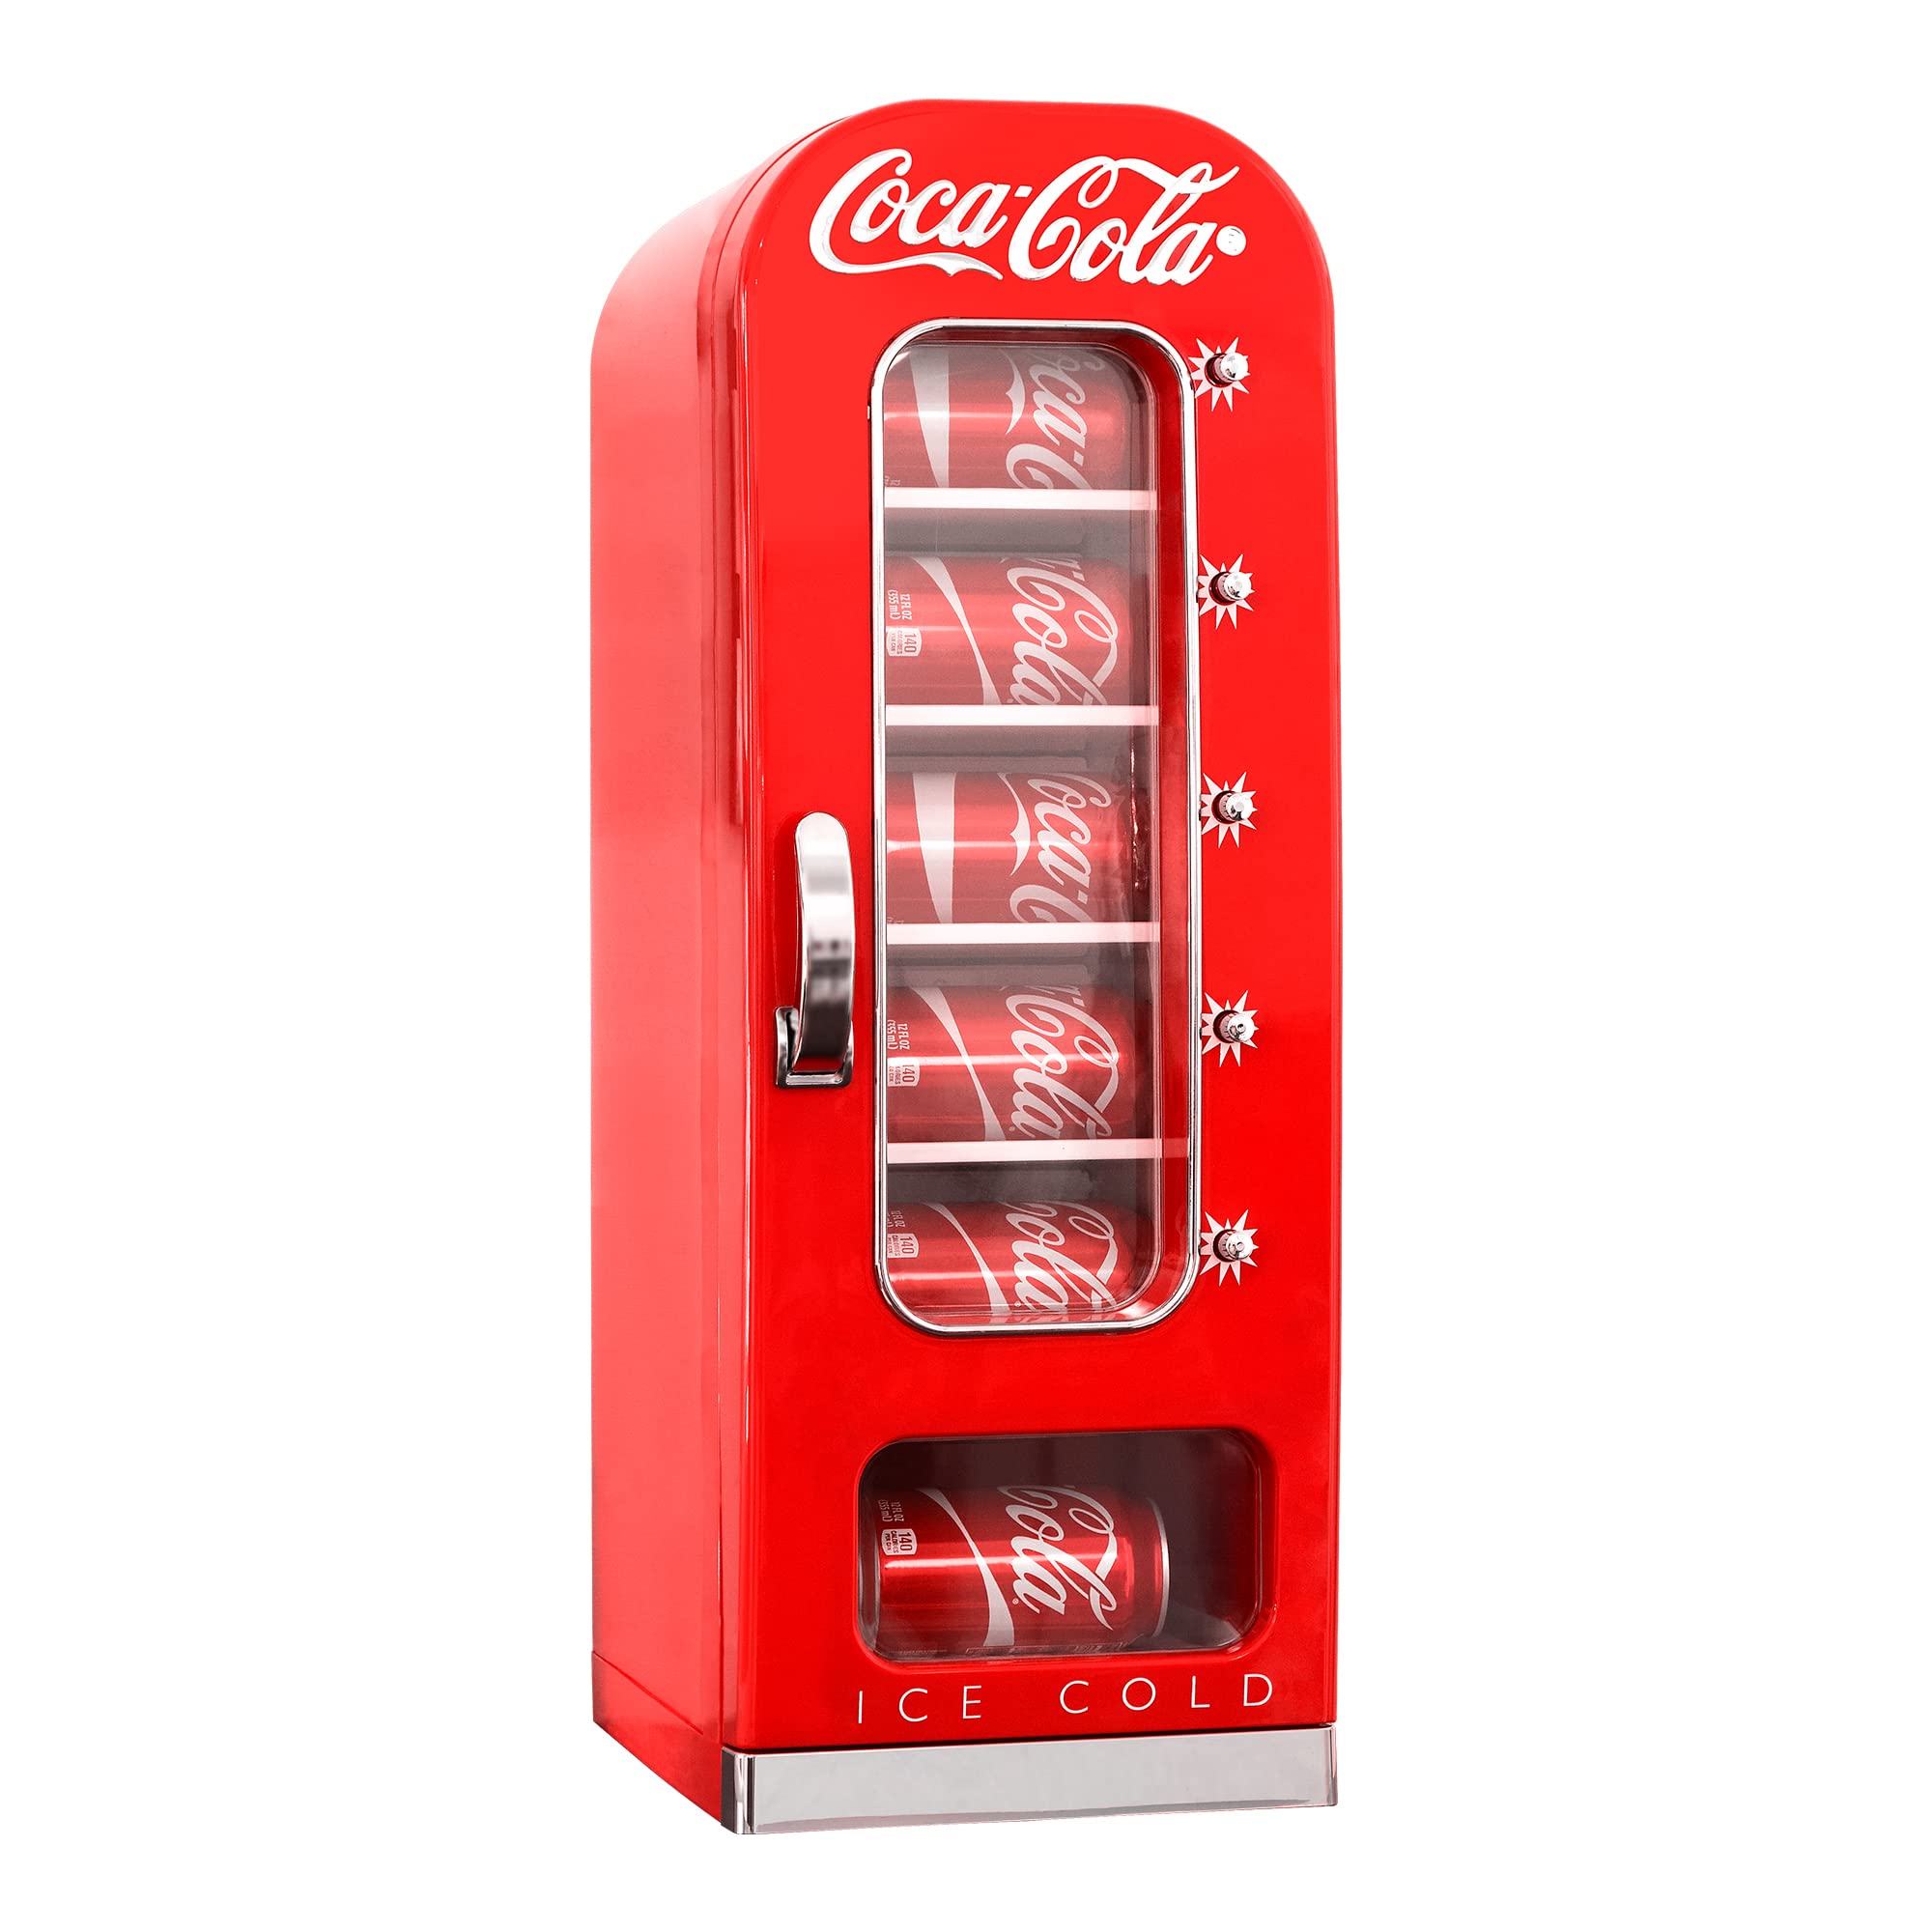 Koolatron Coca-Cola Retro Vending Machine Style 10 Can Thermoelectric Mini Fridge, 12V DC/110V AC with tall window display for Home, Dorm, Office, Travel and Games Room